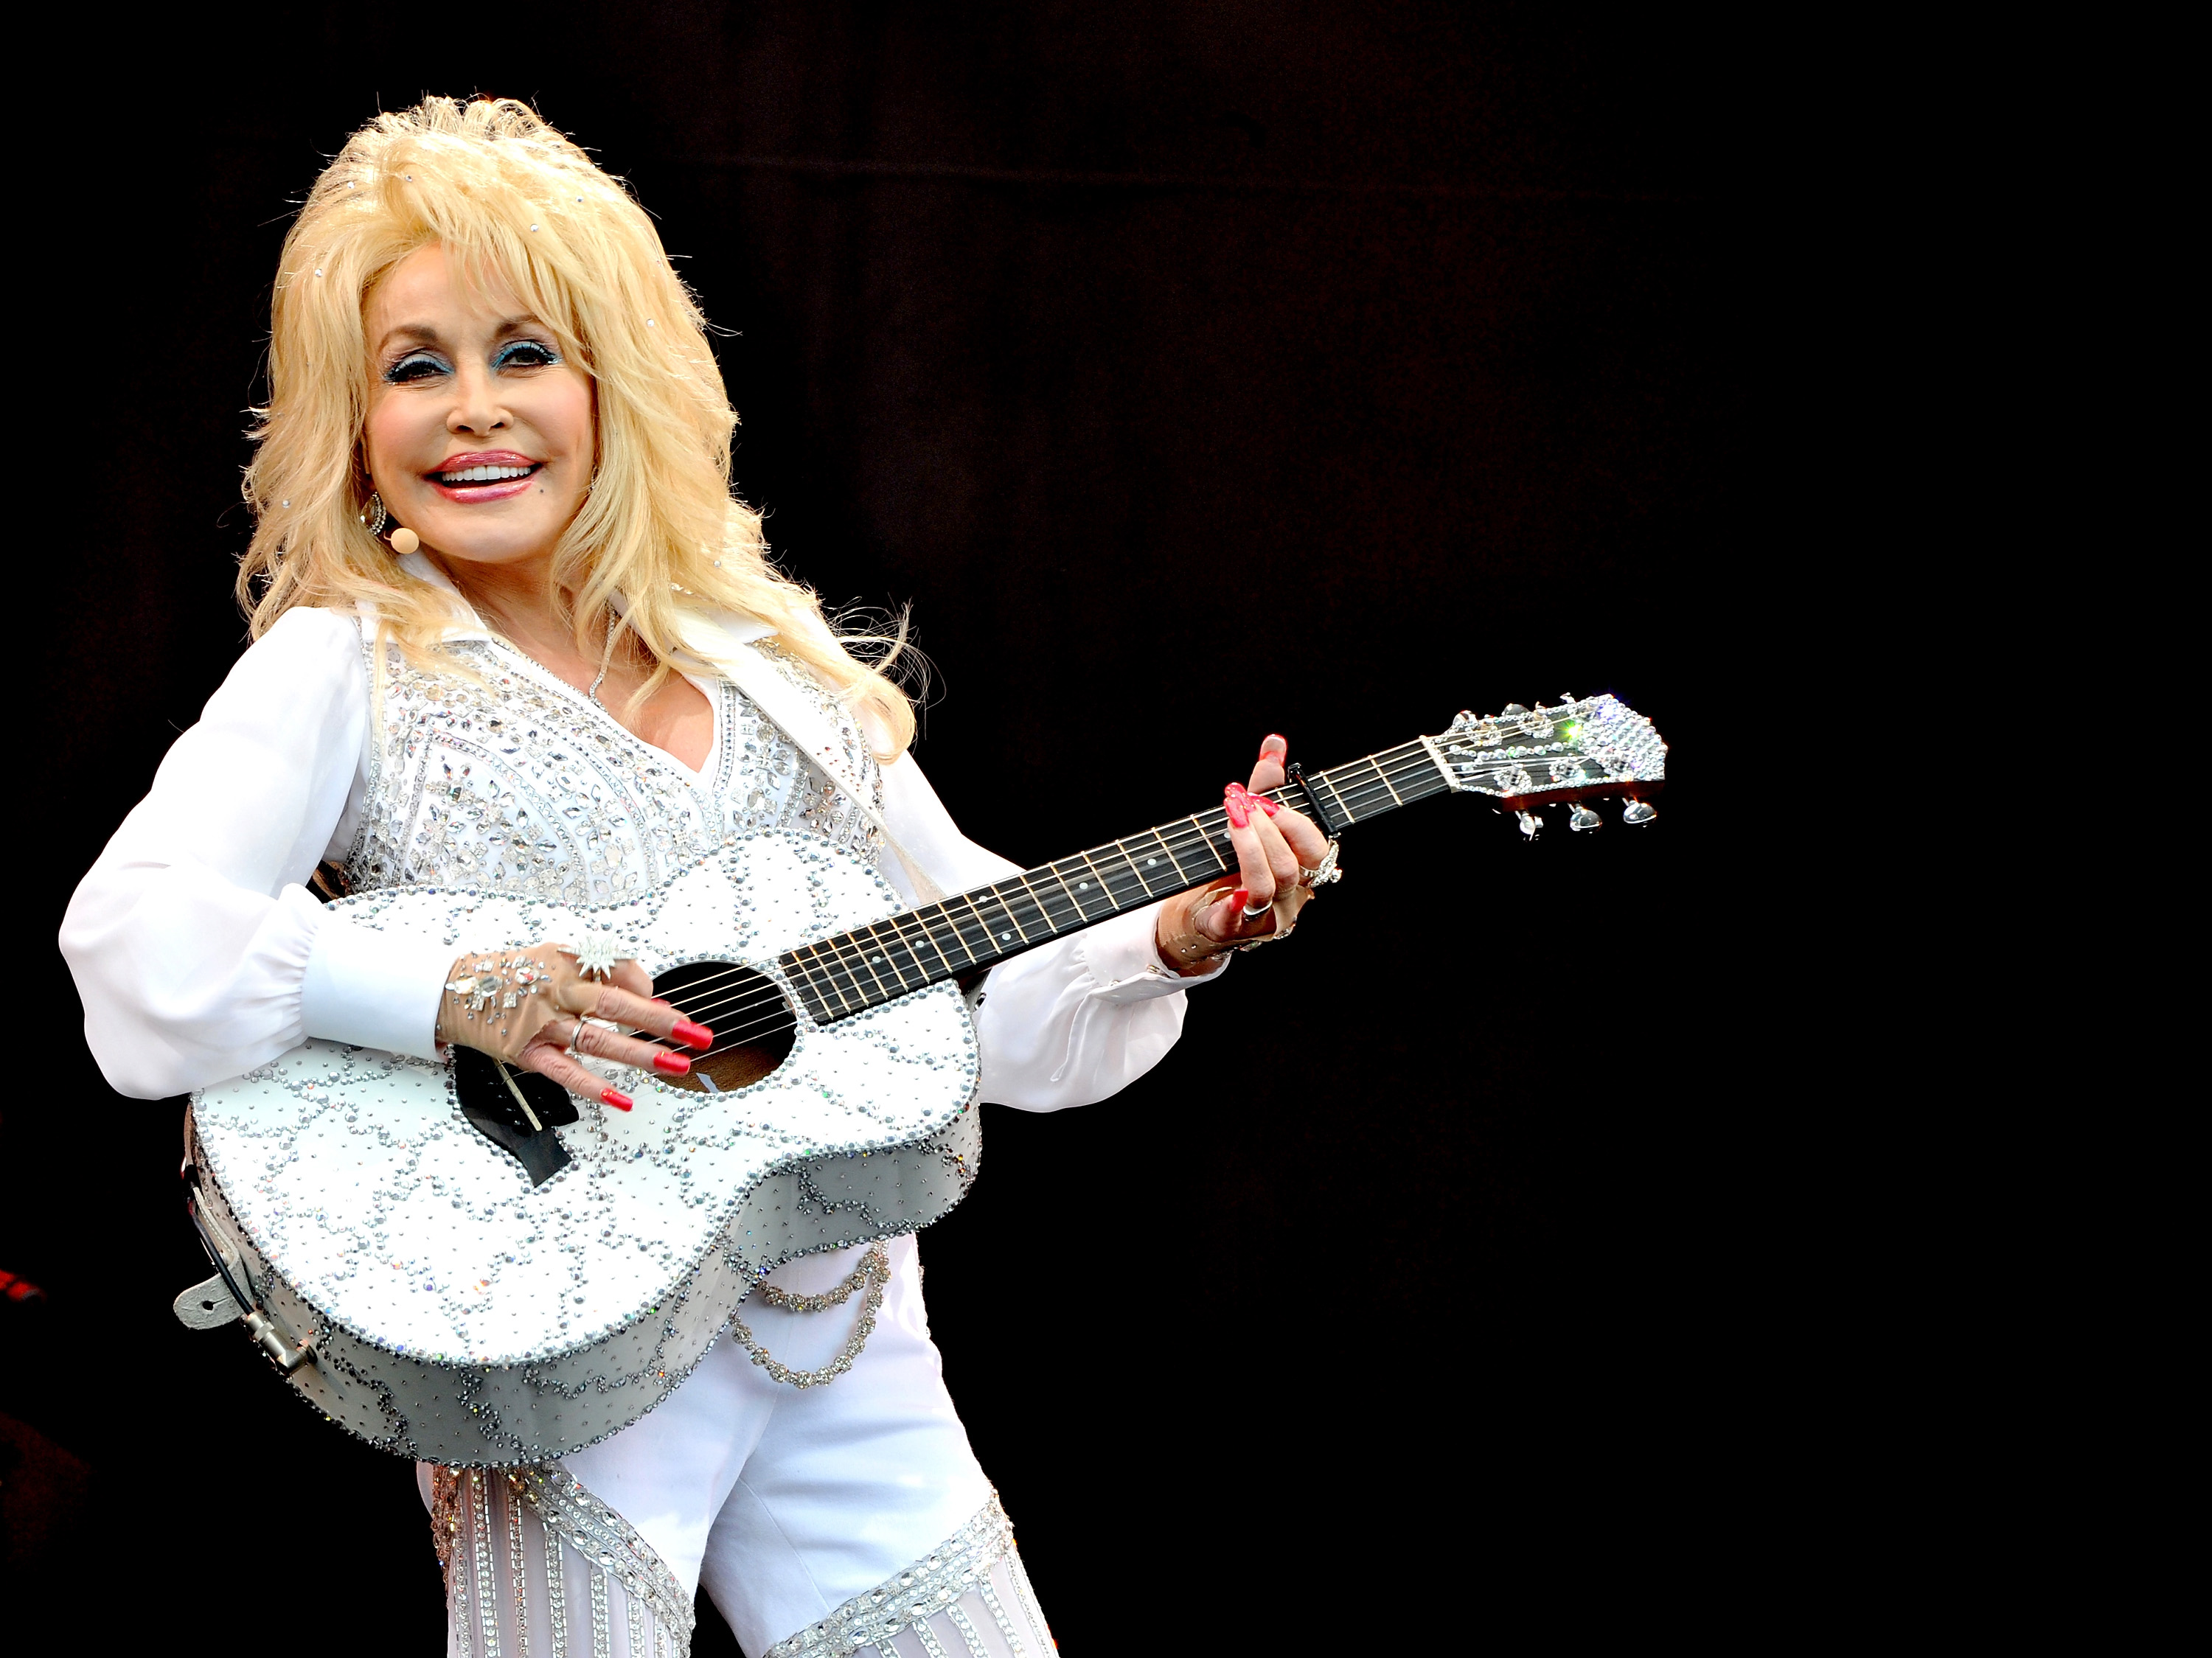 Dolly Parton wears a white rhinestoned outfit and holds a white rhinestoned guitar.